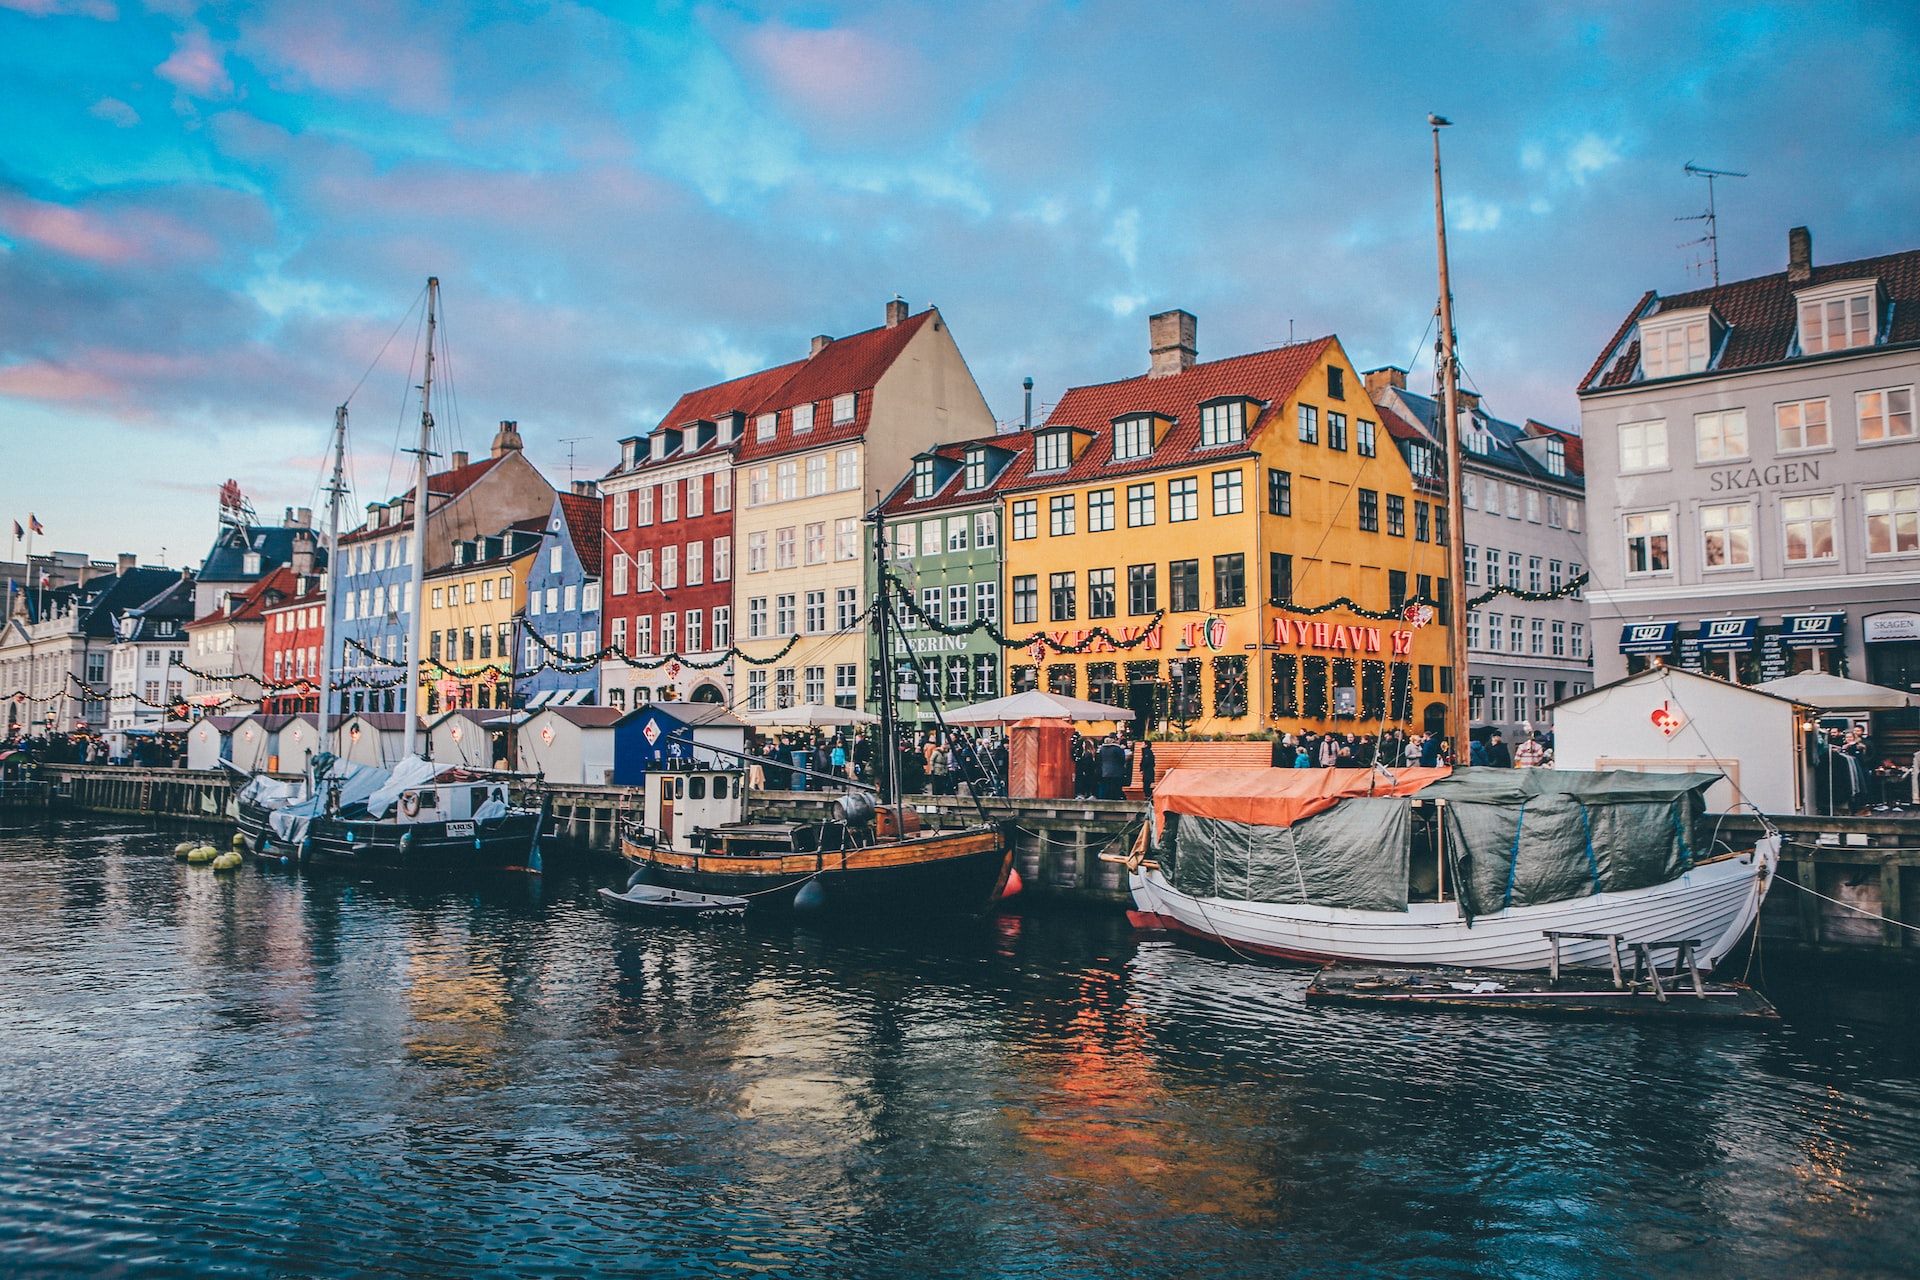 A series of colorful buildings and boats along the waterfront in Copenhagen.